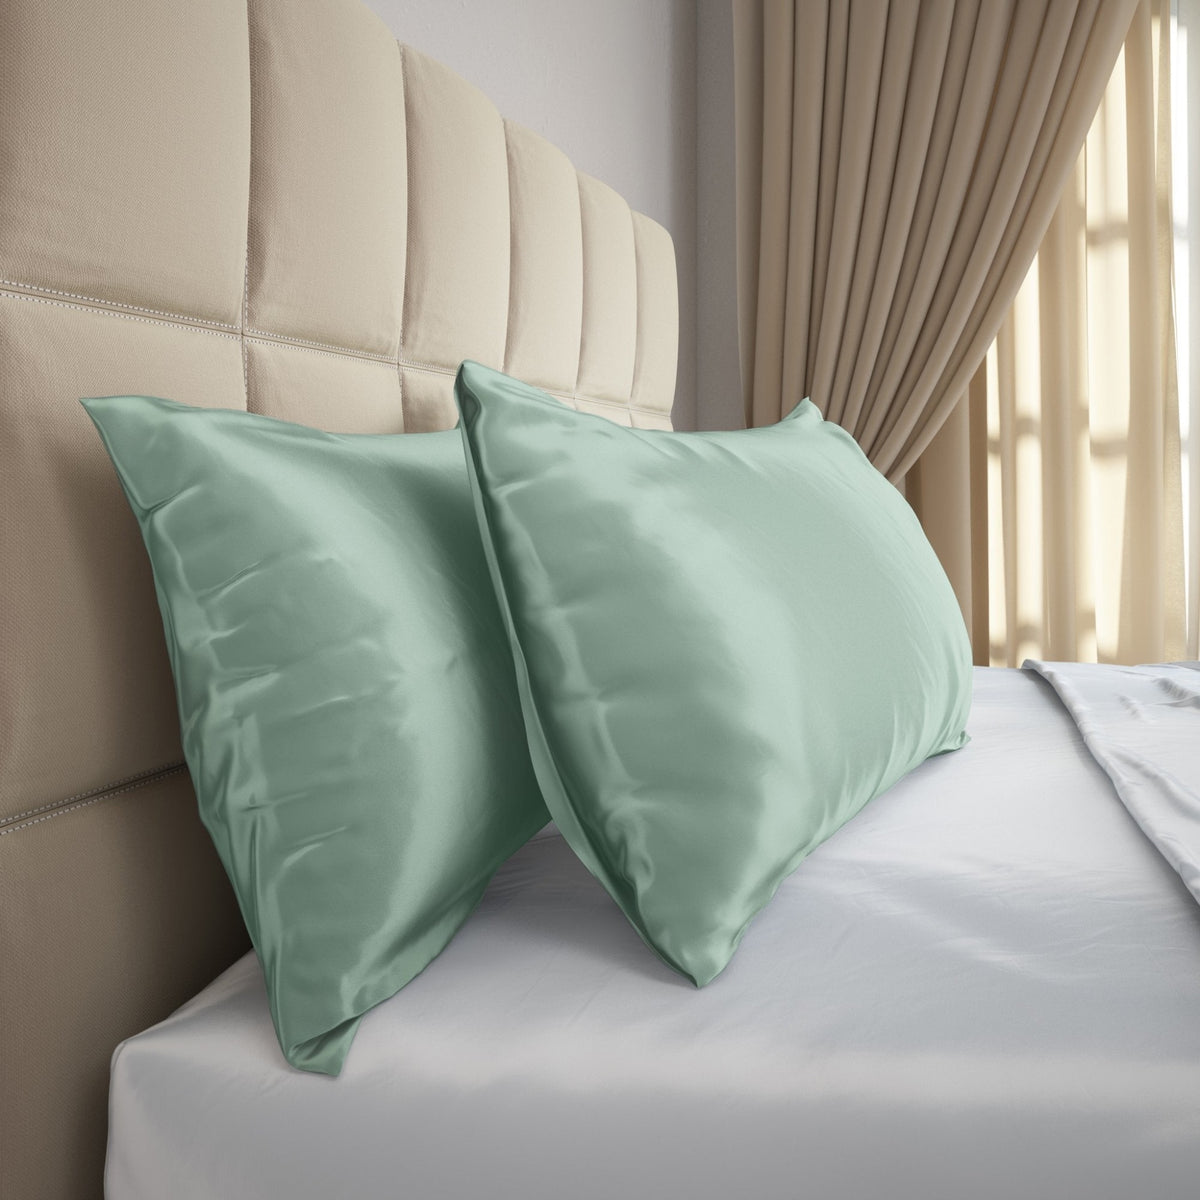 Side View of Mulberry Park Silks Deluxe 19 Momme Pure Silk Pillowcase in Green Color